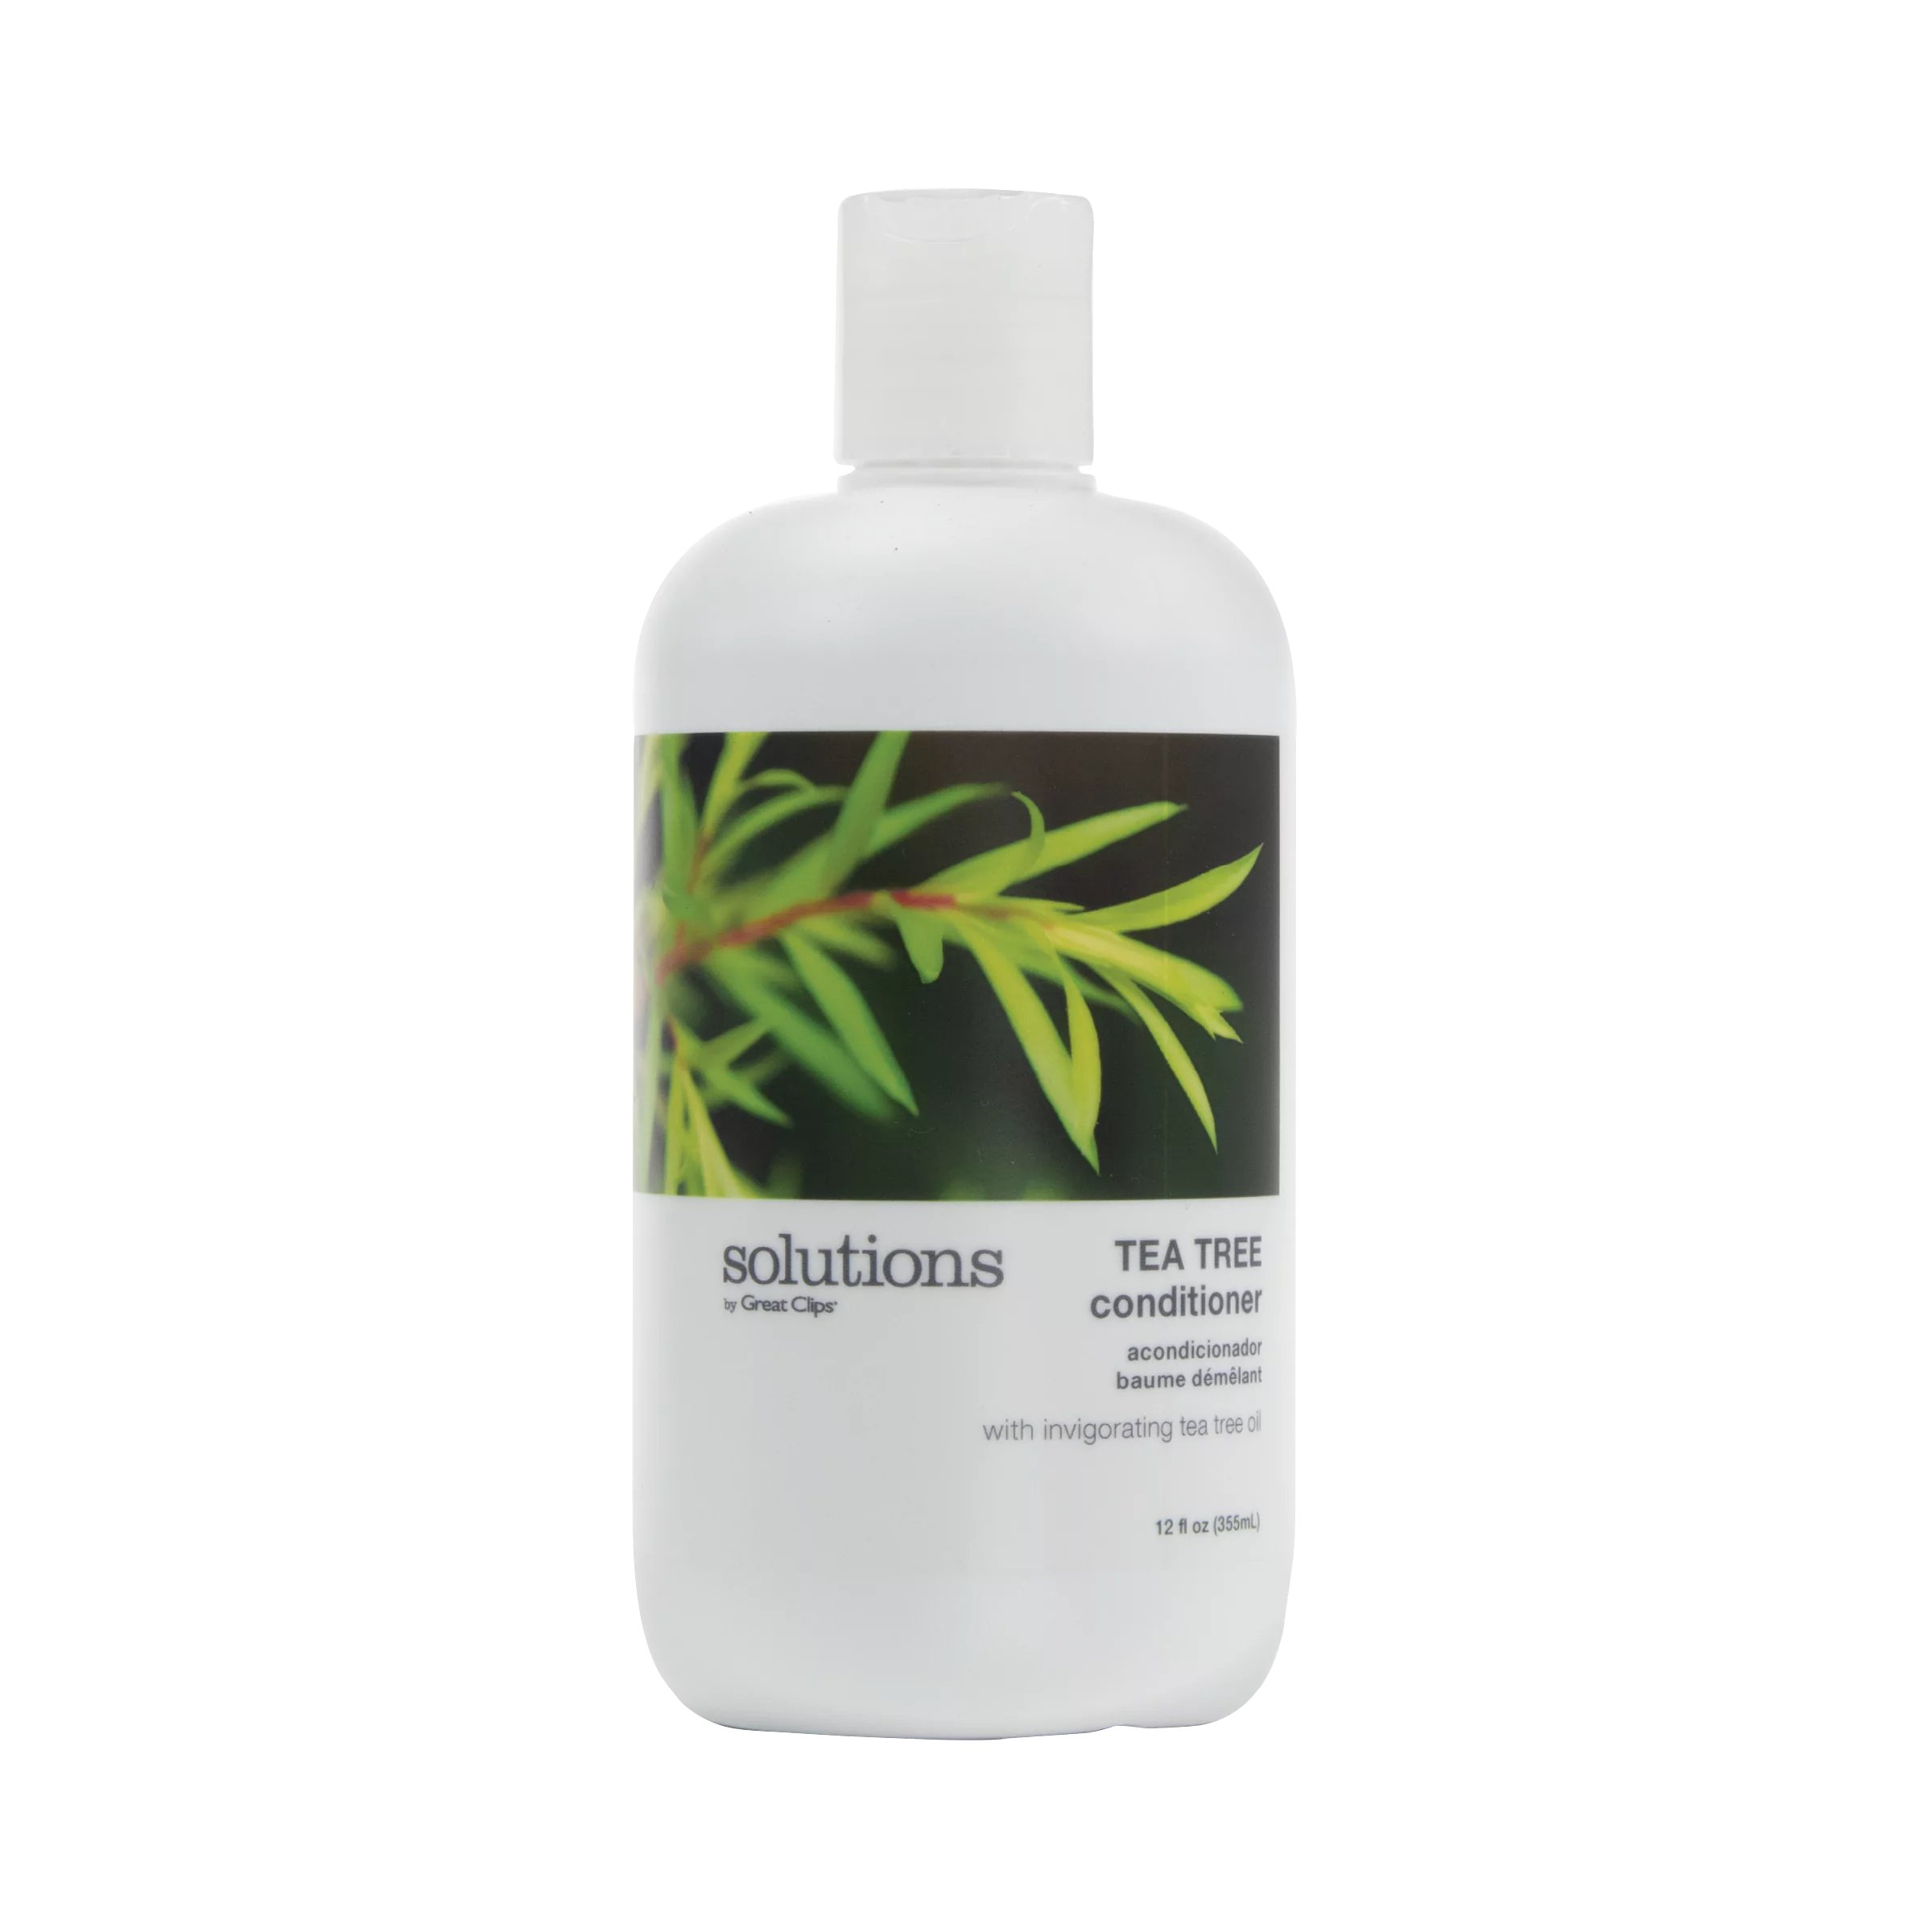 Solutions by Great Clips Tea Tree Conditioner